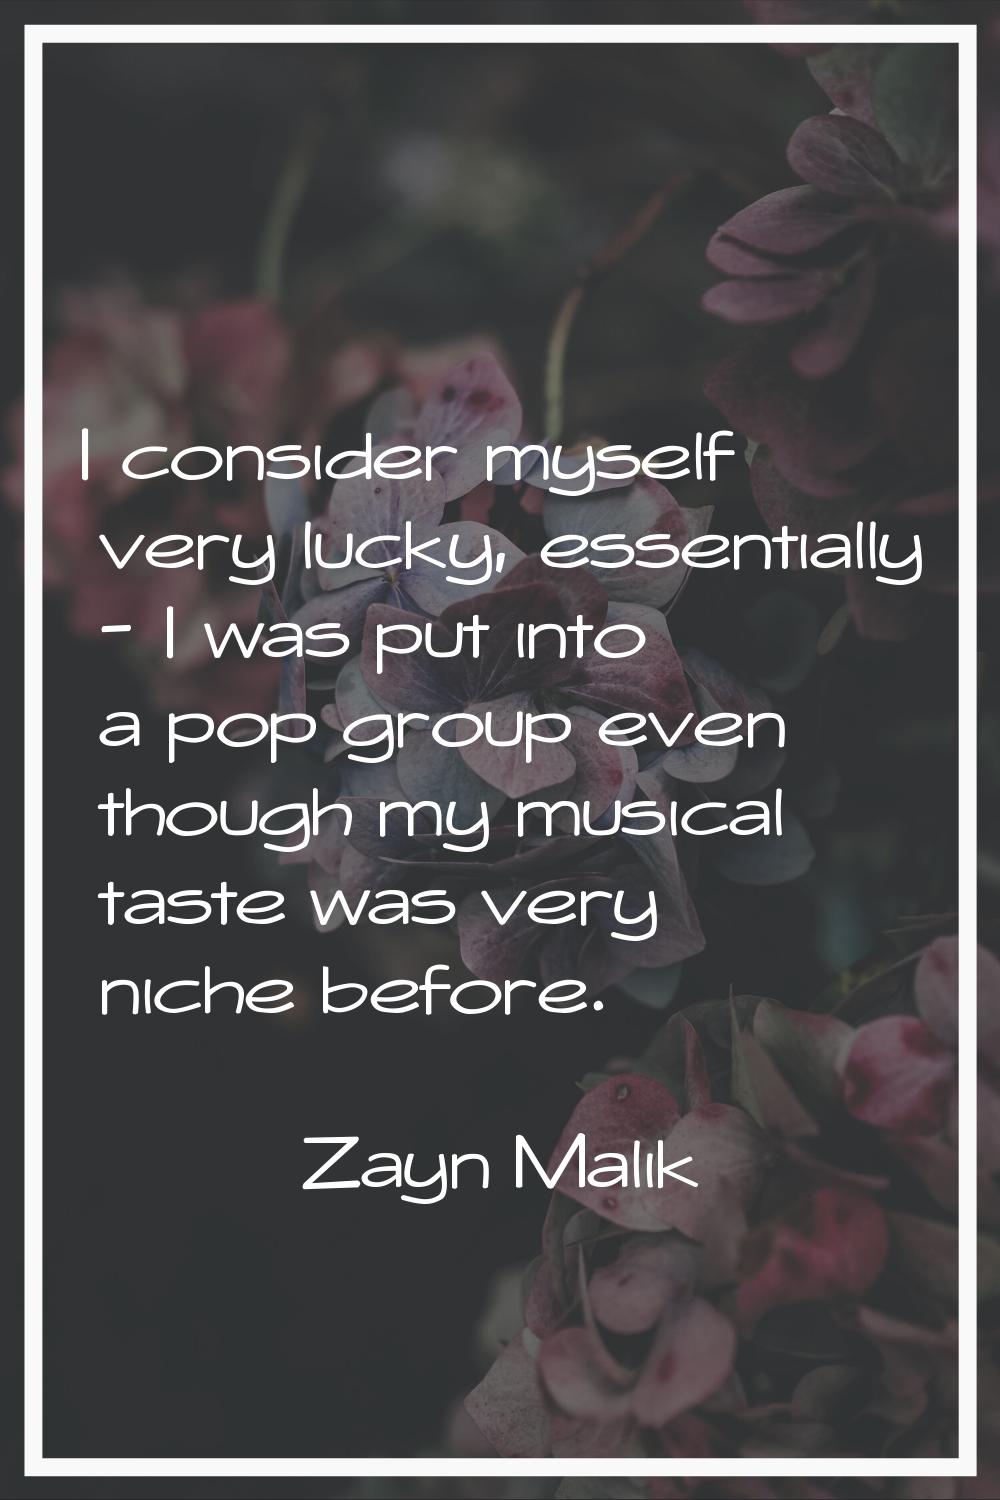 I consider myself very lucky, essentially - I was put into a pop group even though my musical taste